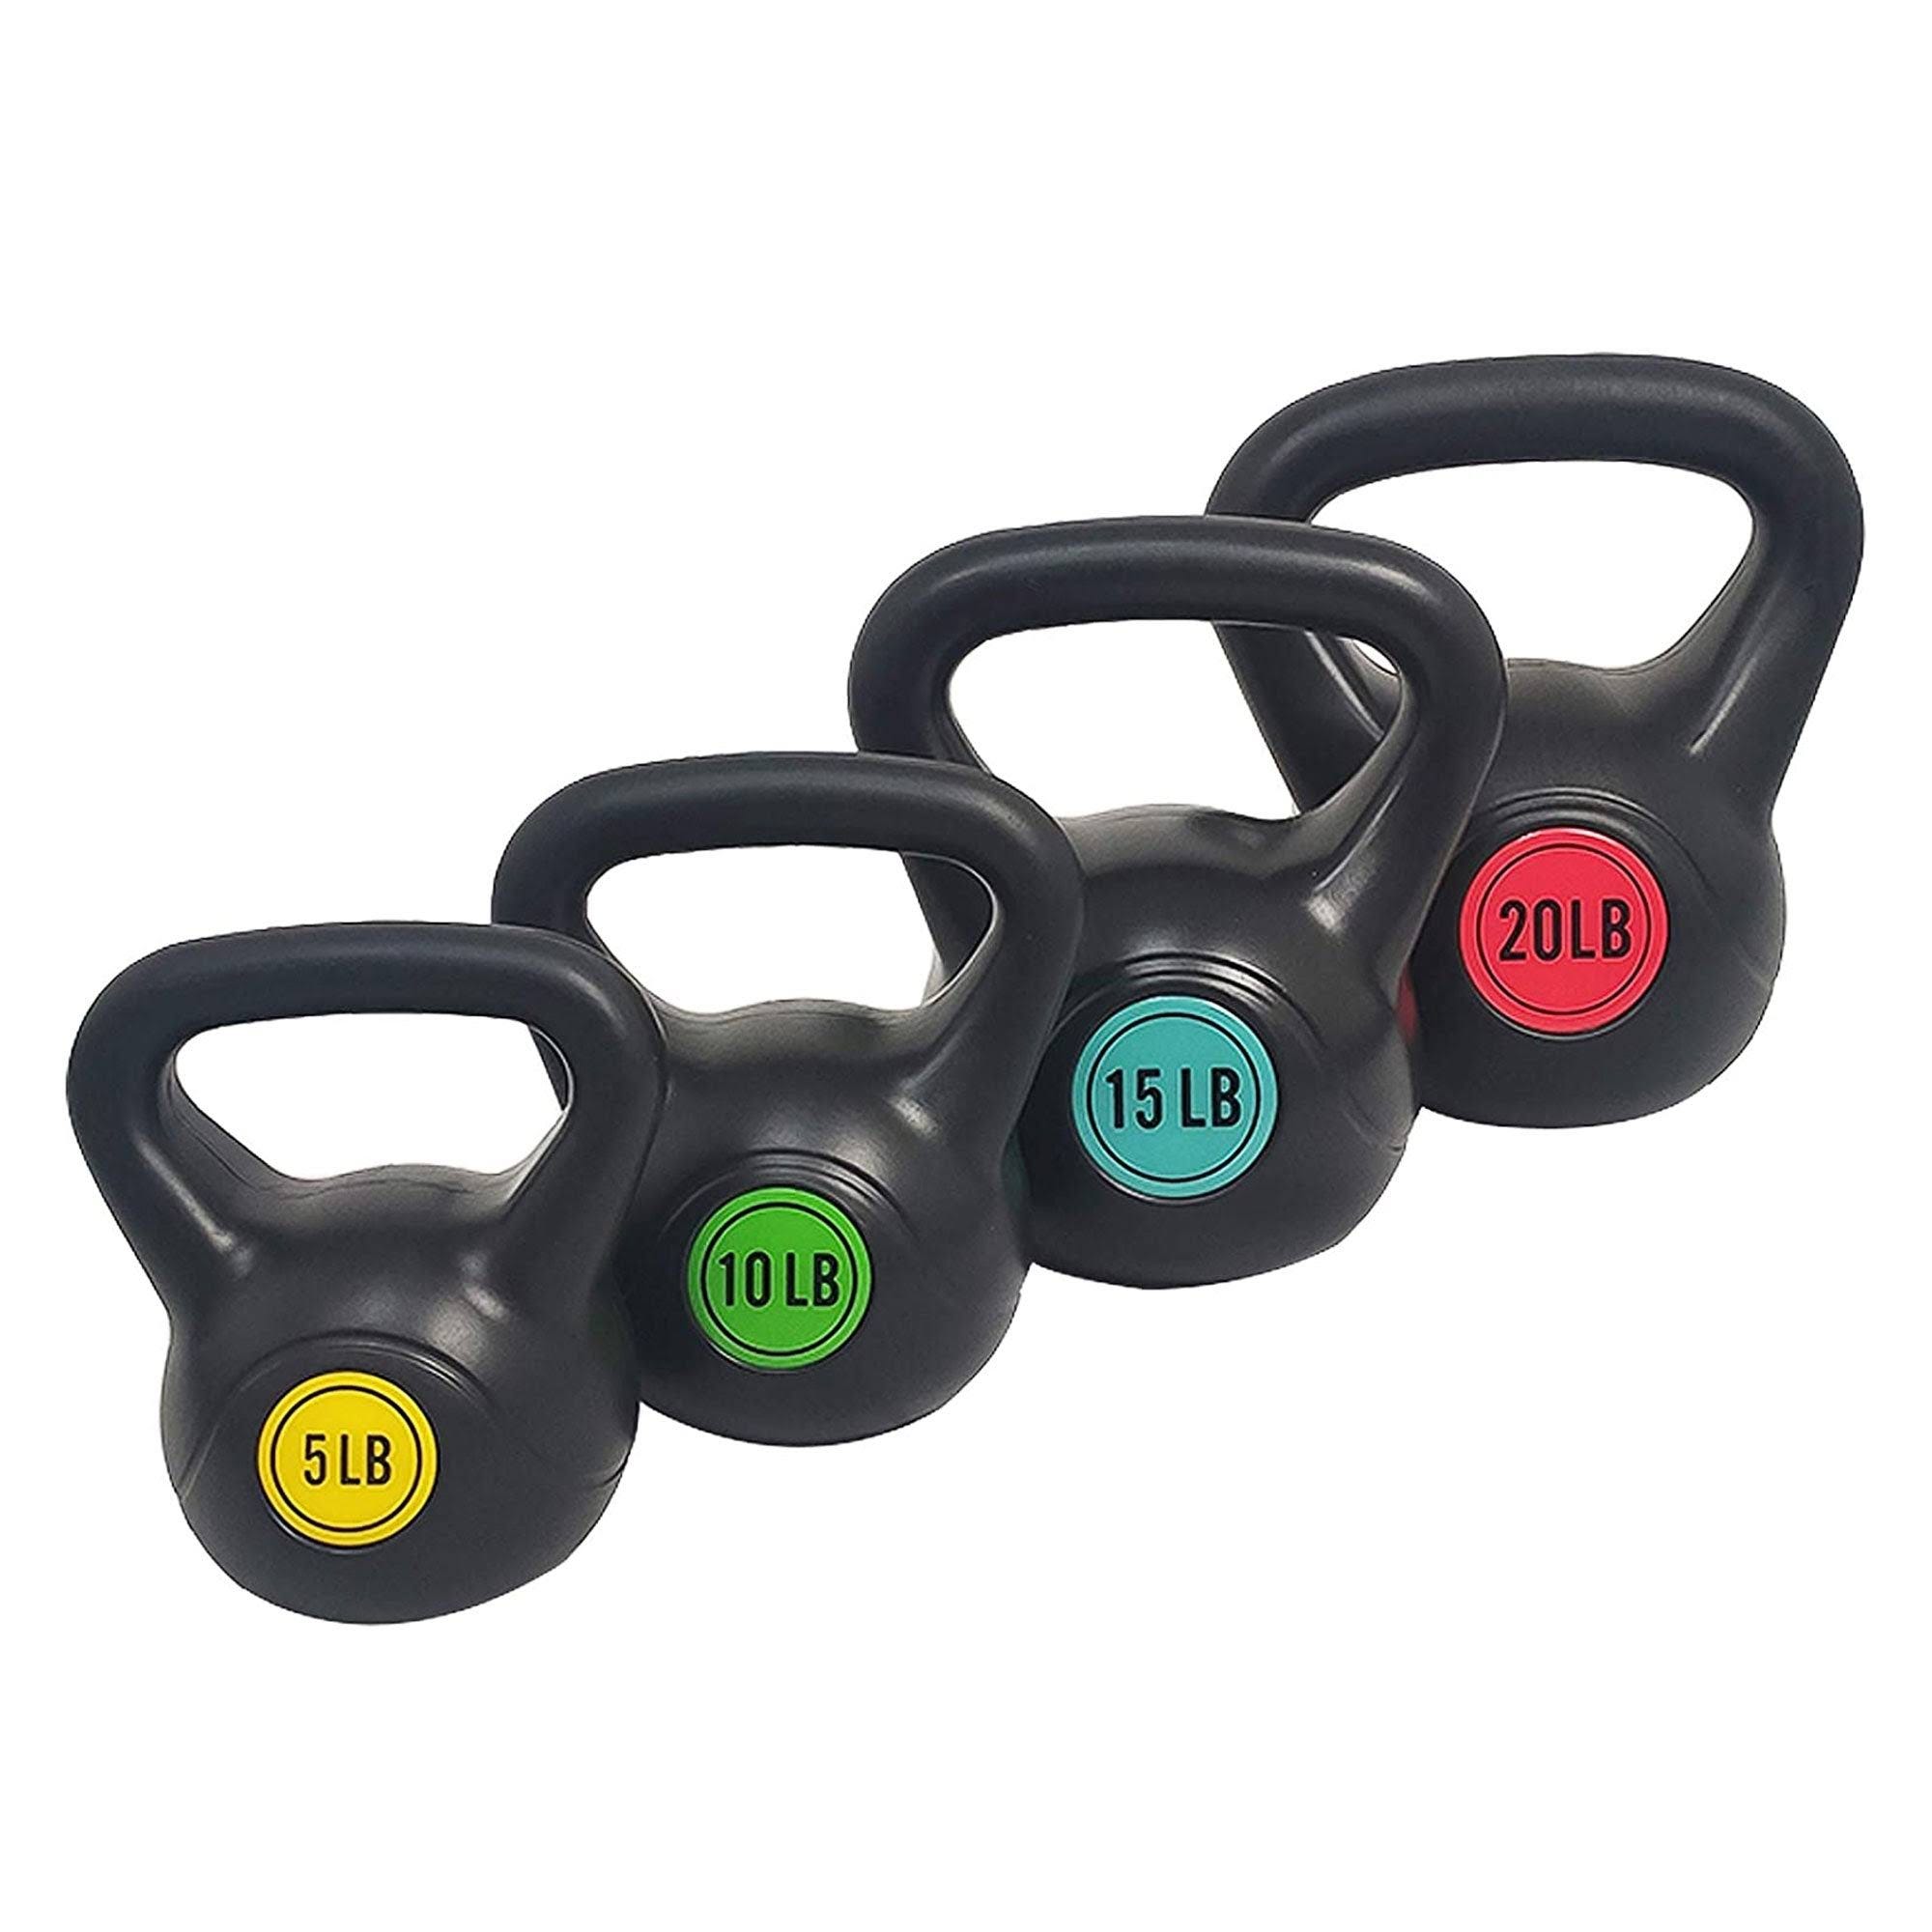 Premium 4-Piece Kettlebell Set for Full Body Workouts | Image